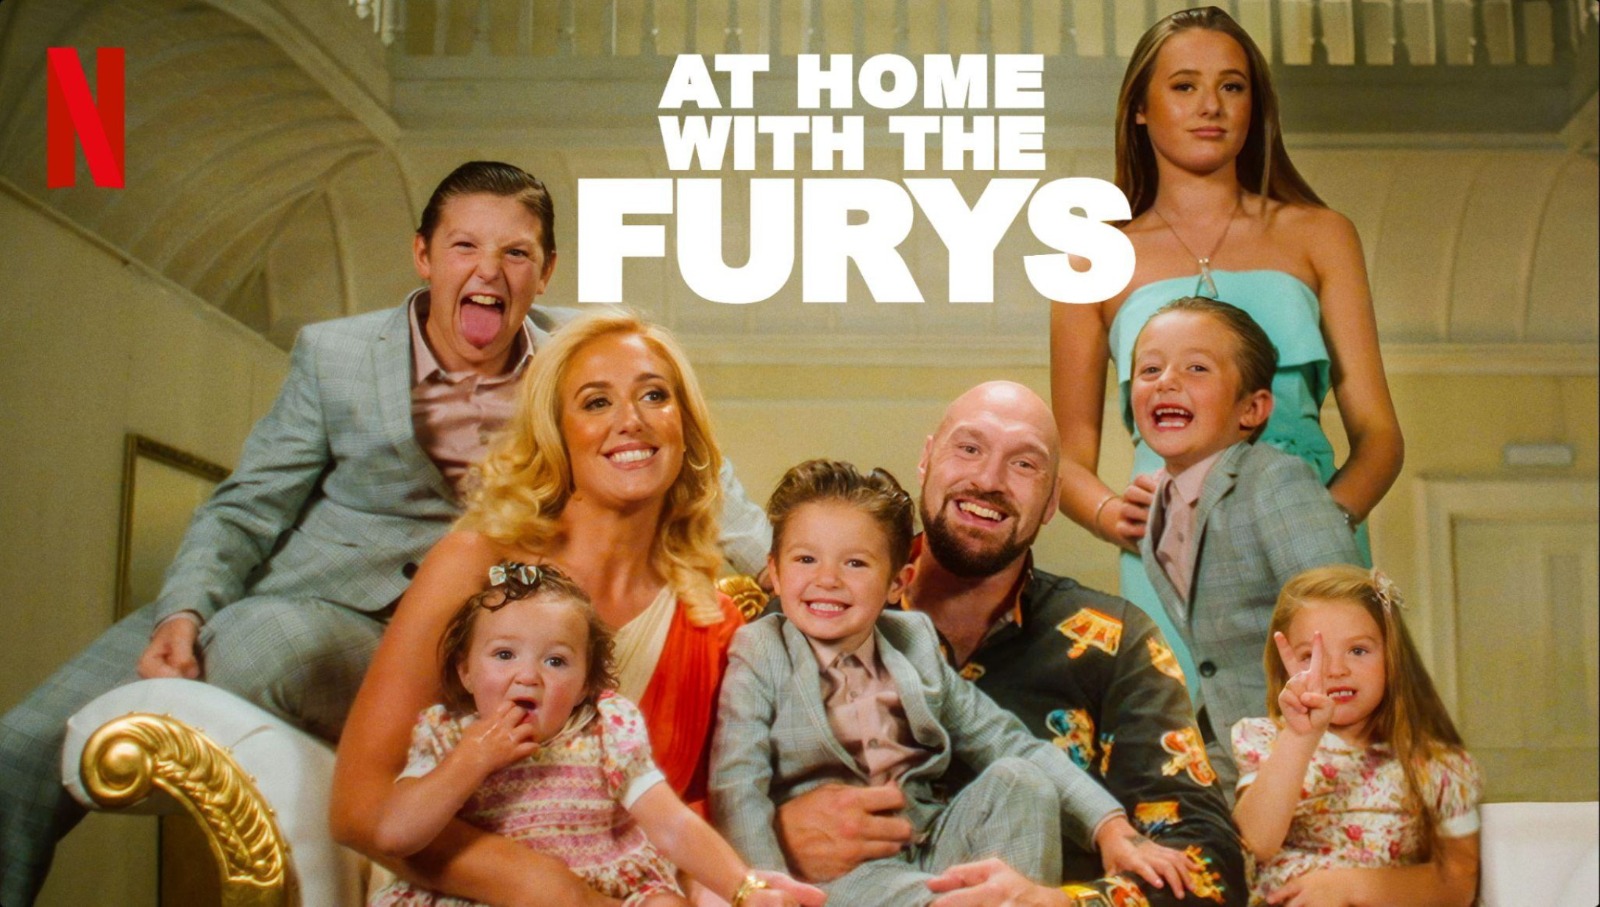 At Home With The Furys Season 1 Release Date